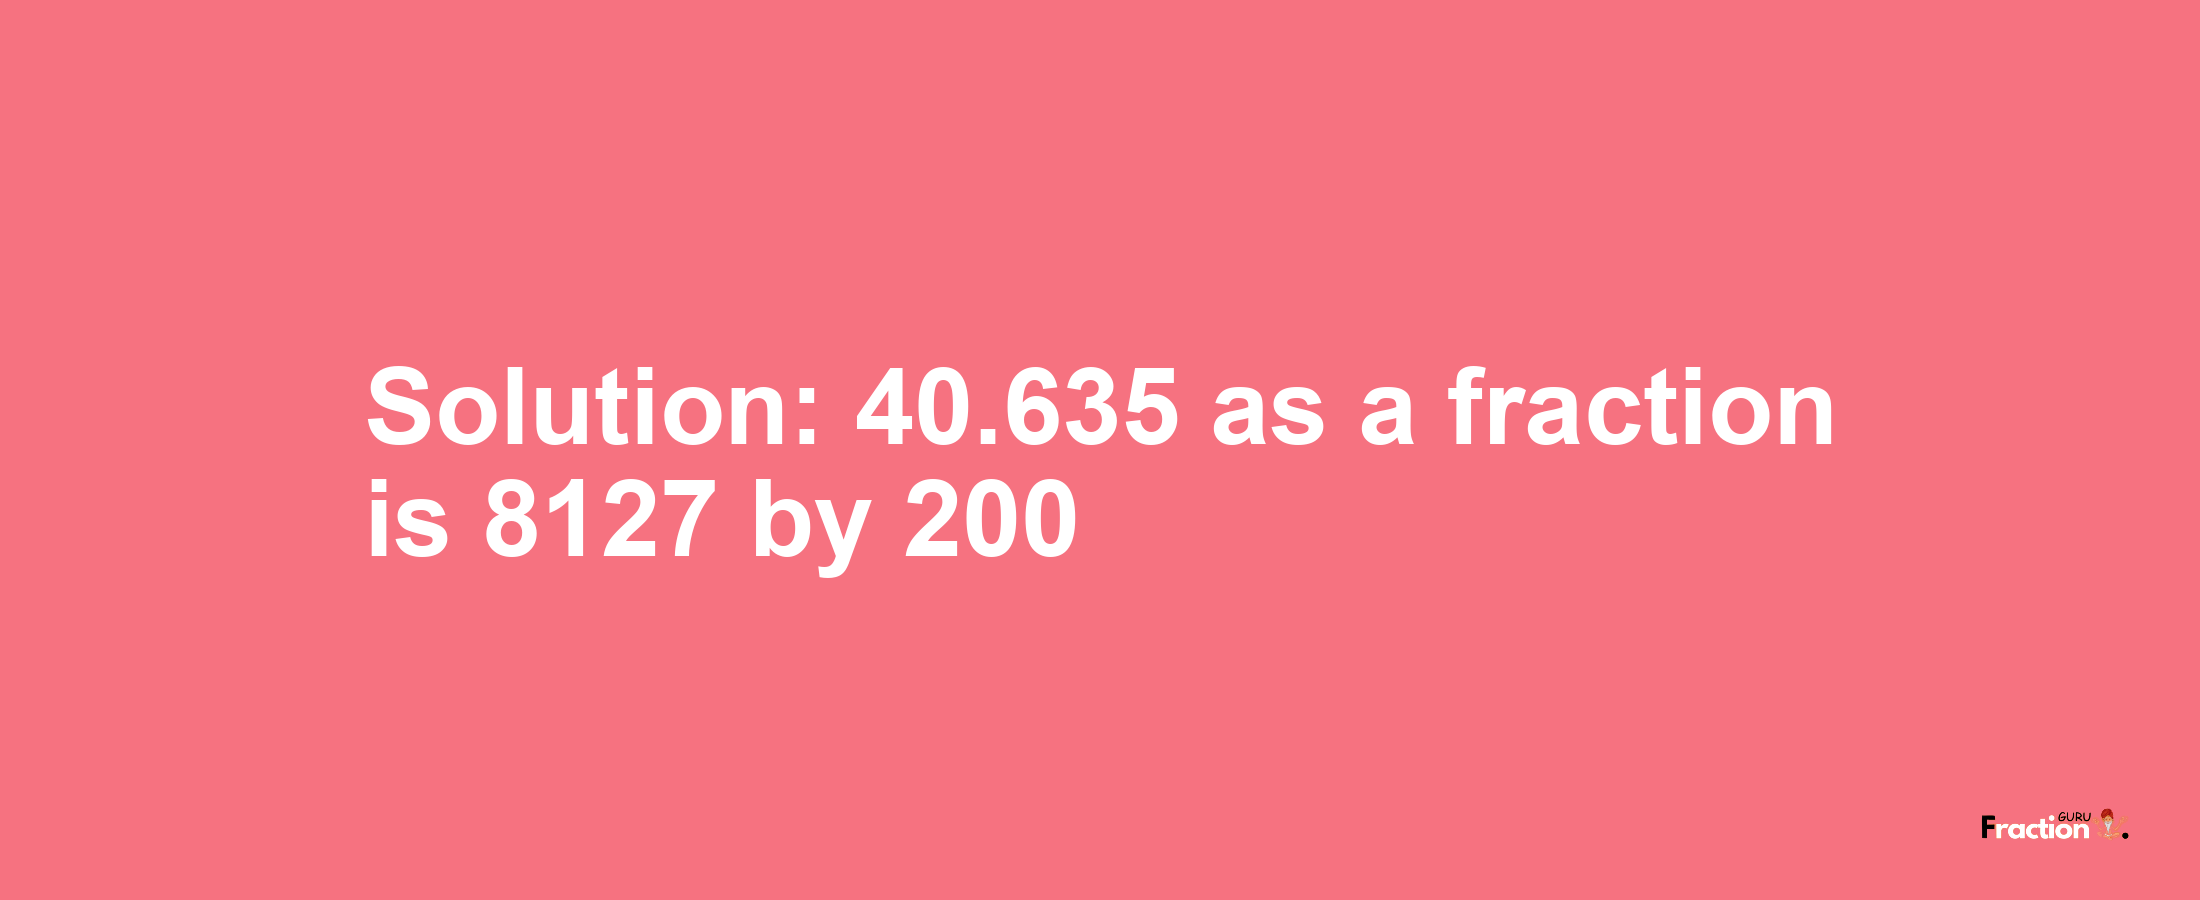 Solution:40.635 as a fraction is 8127/200